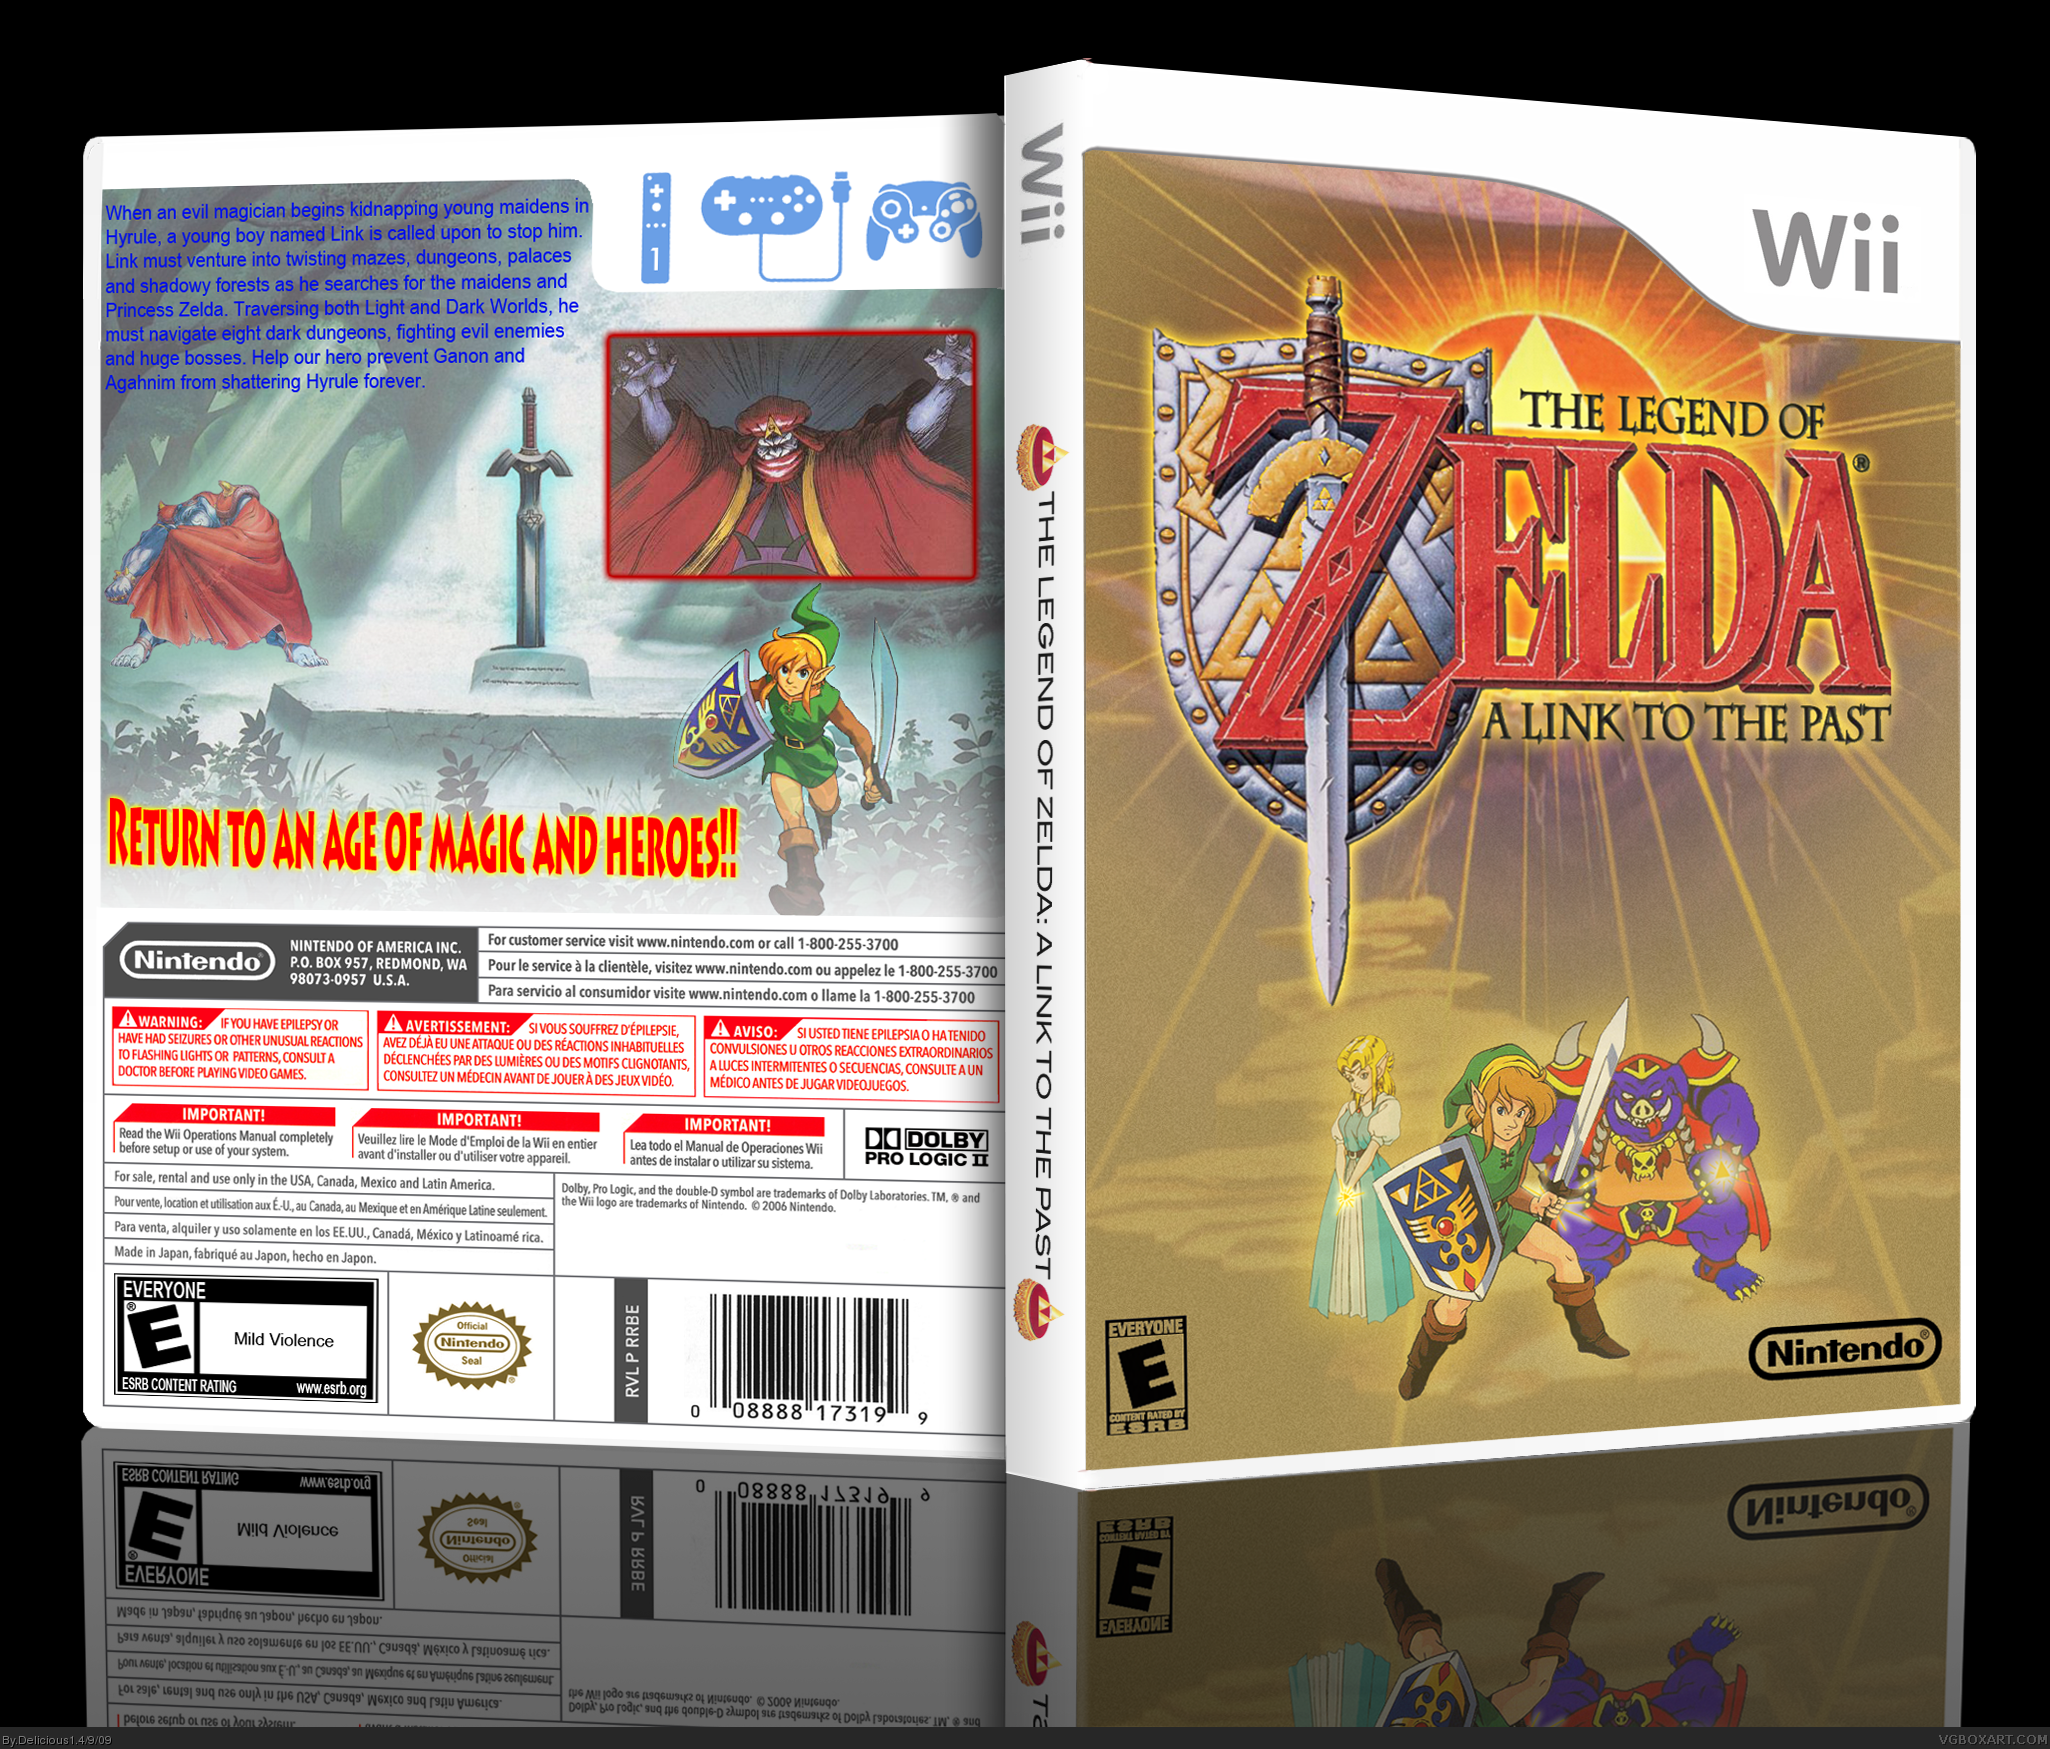 The Legend of Zelda: A Link To The Past box cover